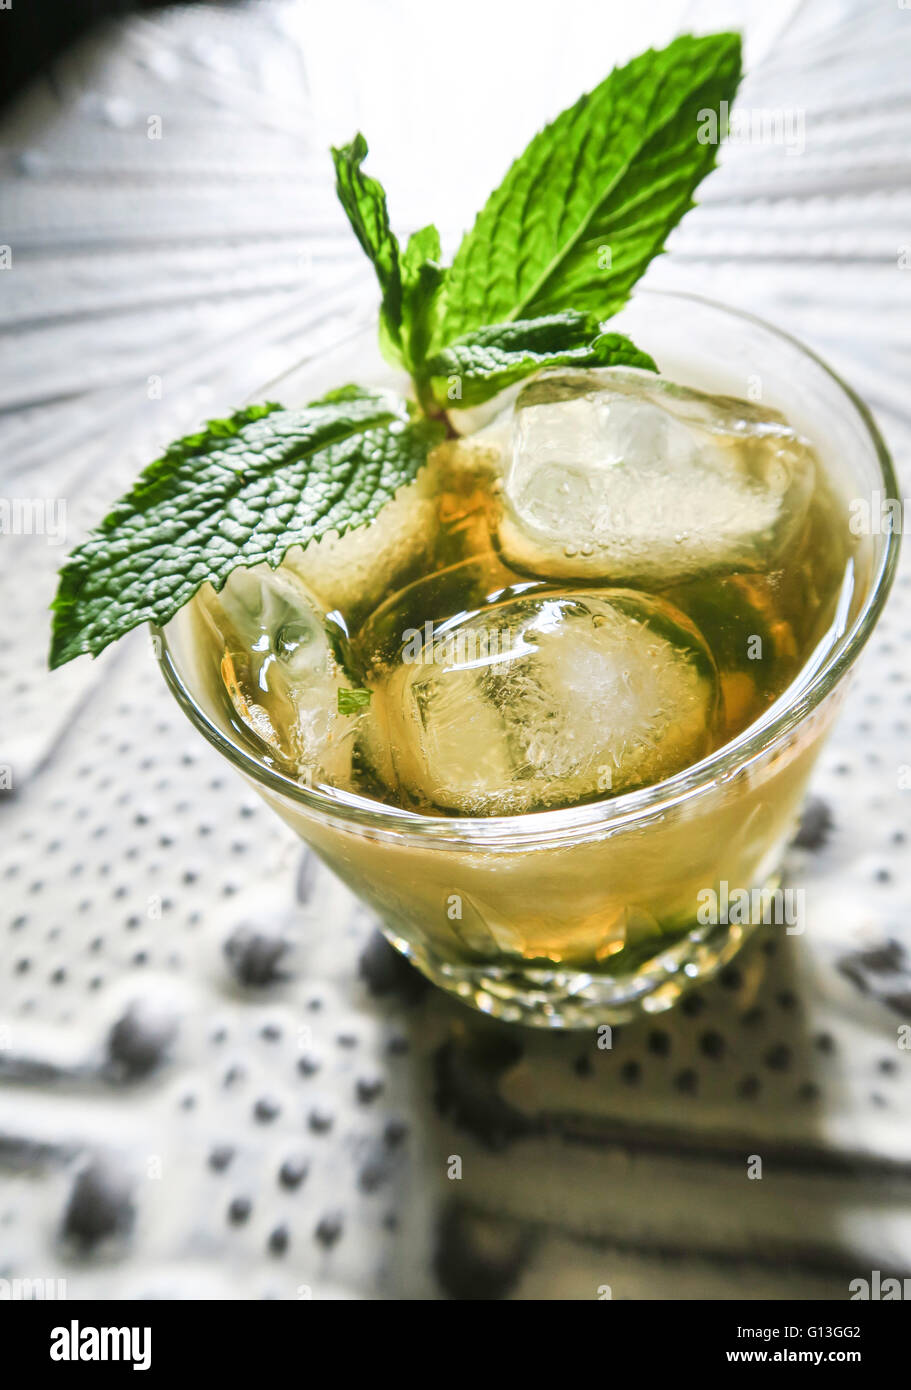 Mint Julep Cocktail in Crystal Glass with Sprig of Fresh Mint Garnish, USA Stock Photo